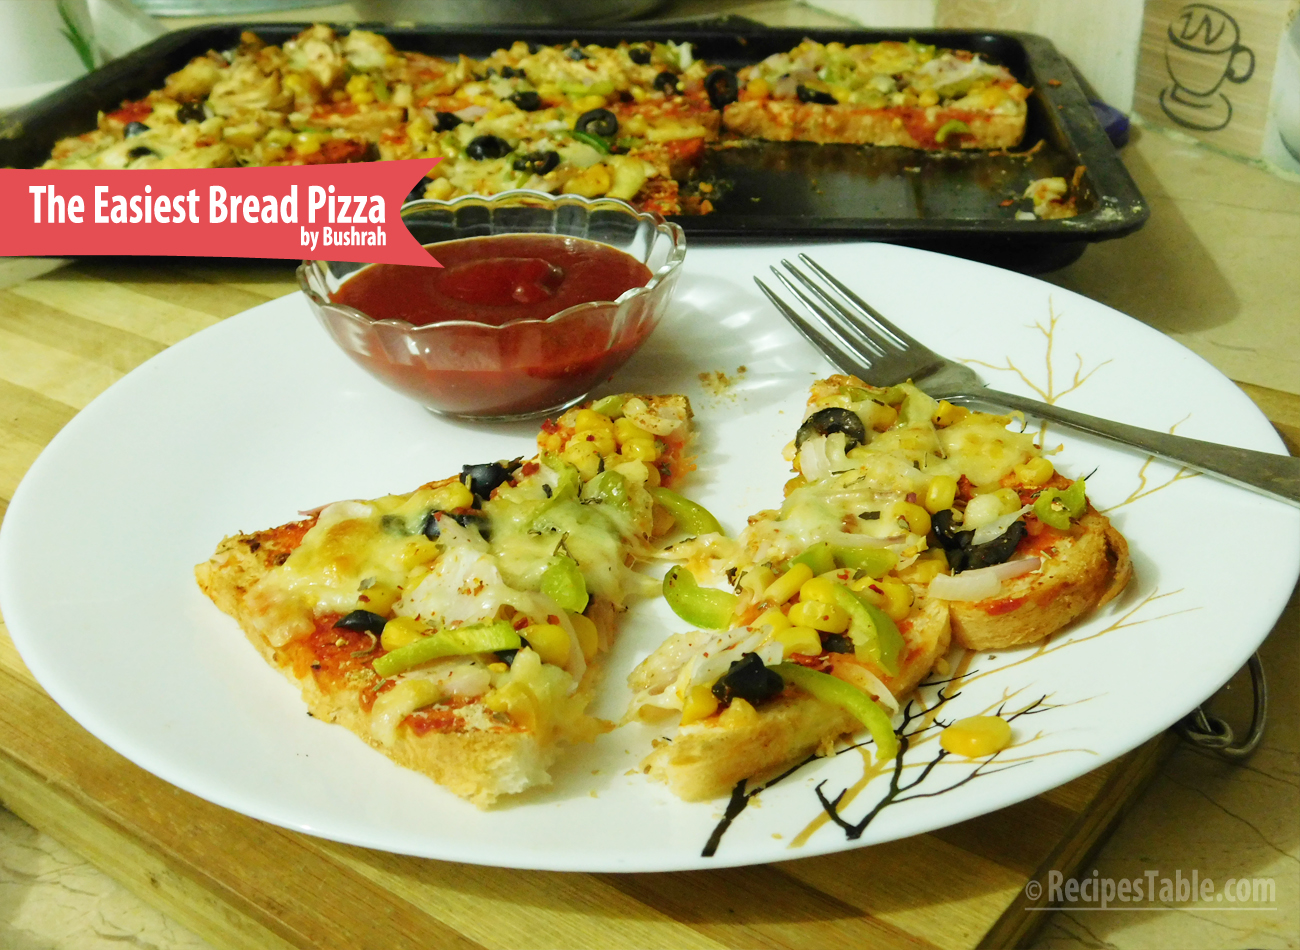 The Easiest Bread Pizza Recipe